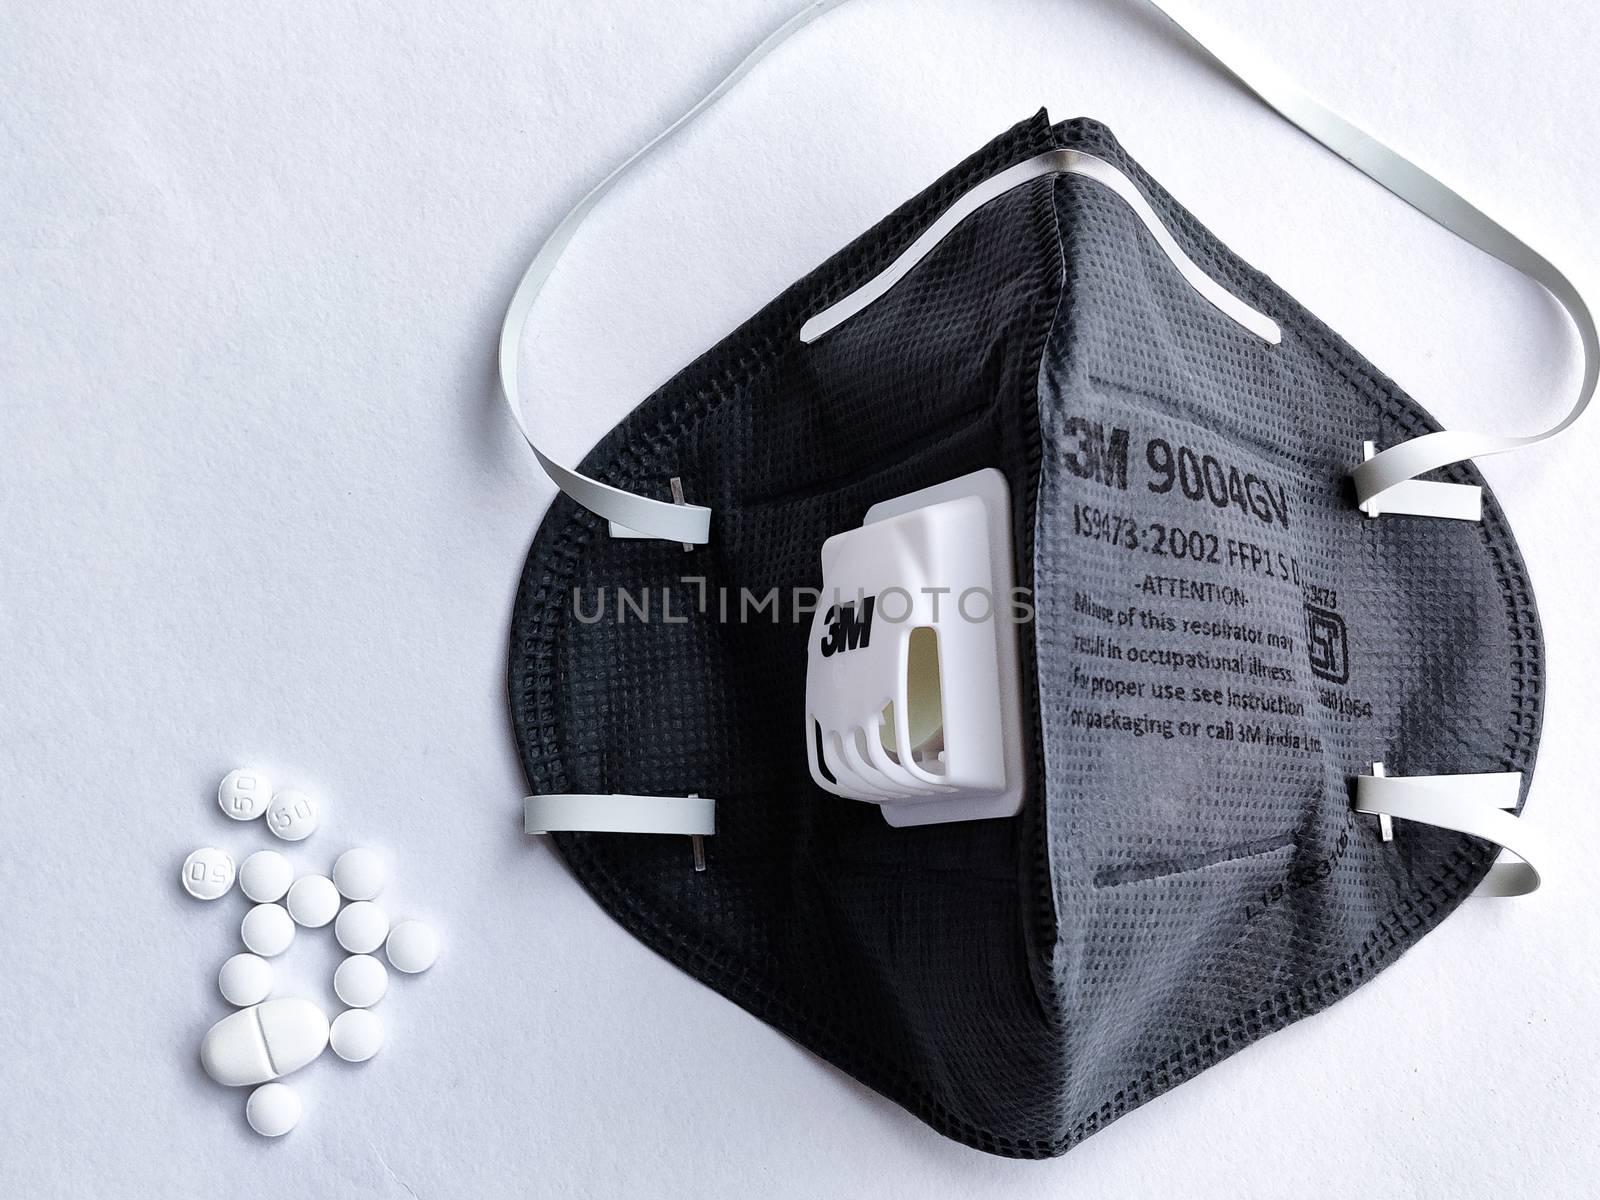 New Delhi, India, 2020. Selective focus of 3M Grey N95 face mask on a white background with medicine tablets for safety against Corona virus (Covid-19) pandemic to reduce the rate of spread